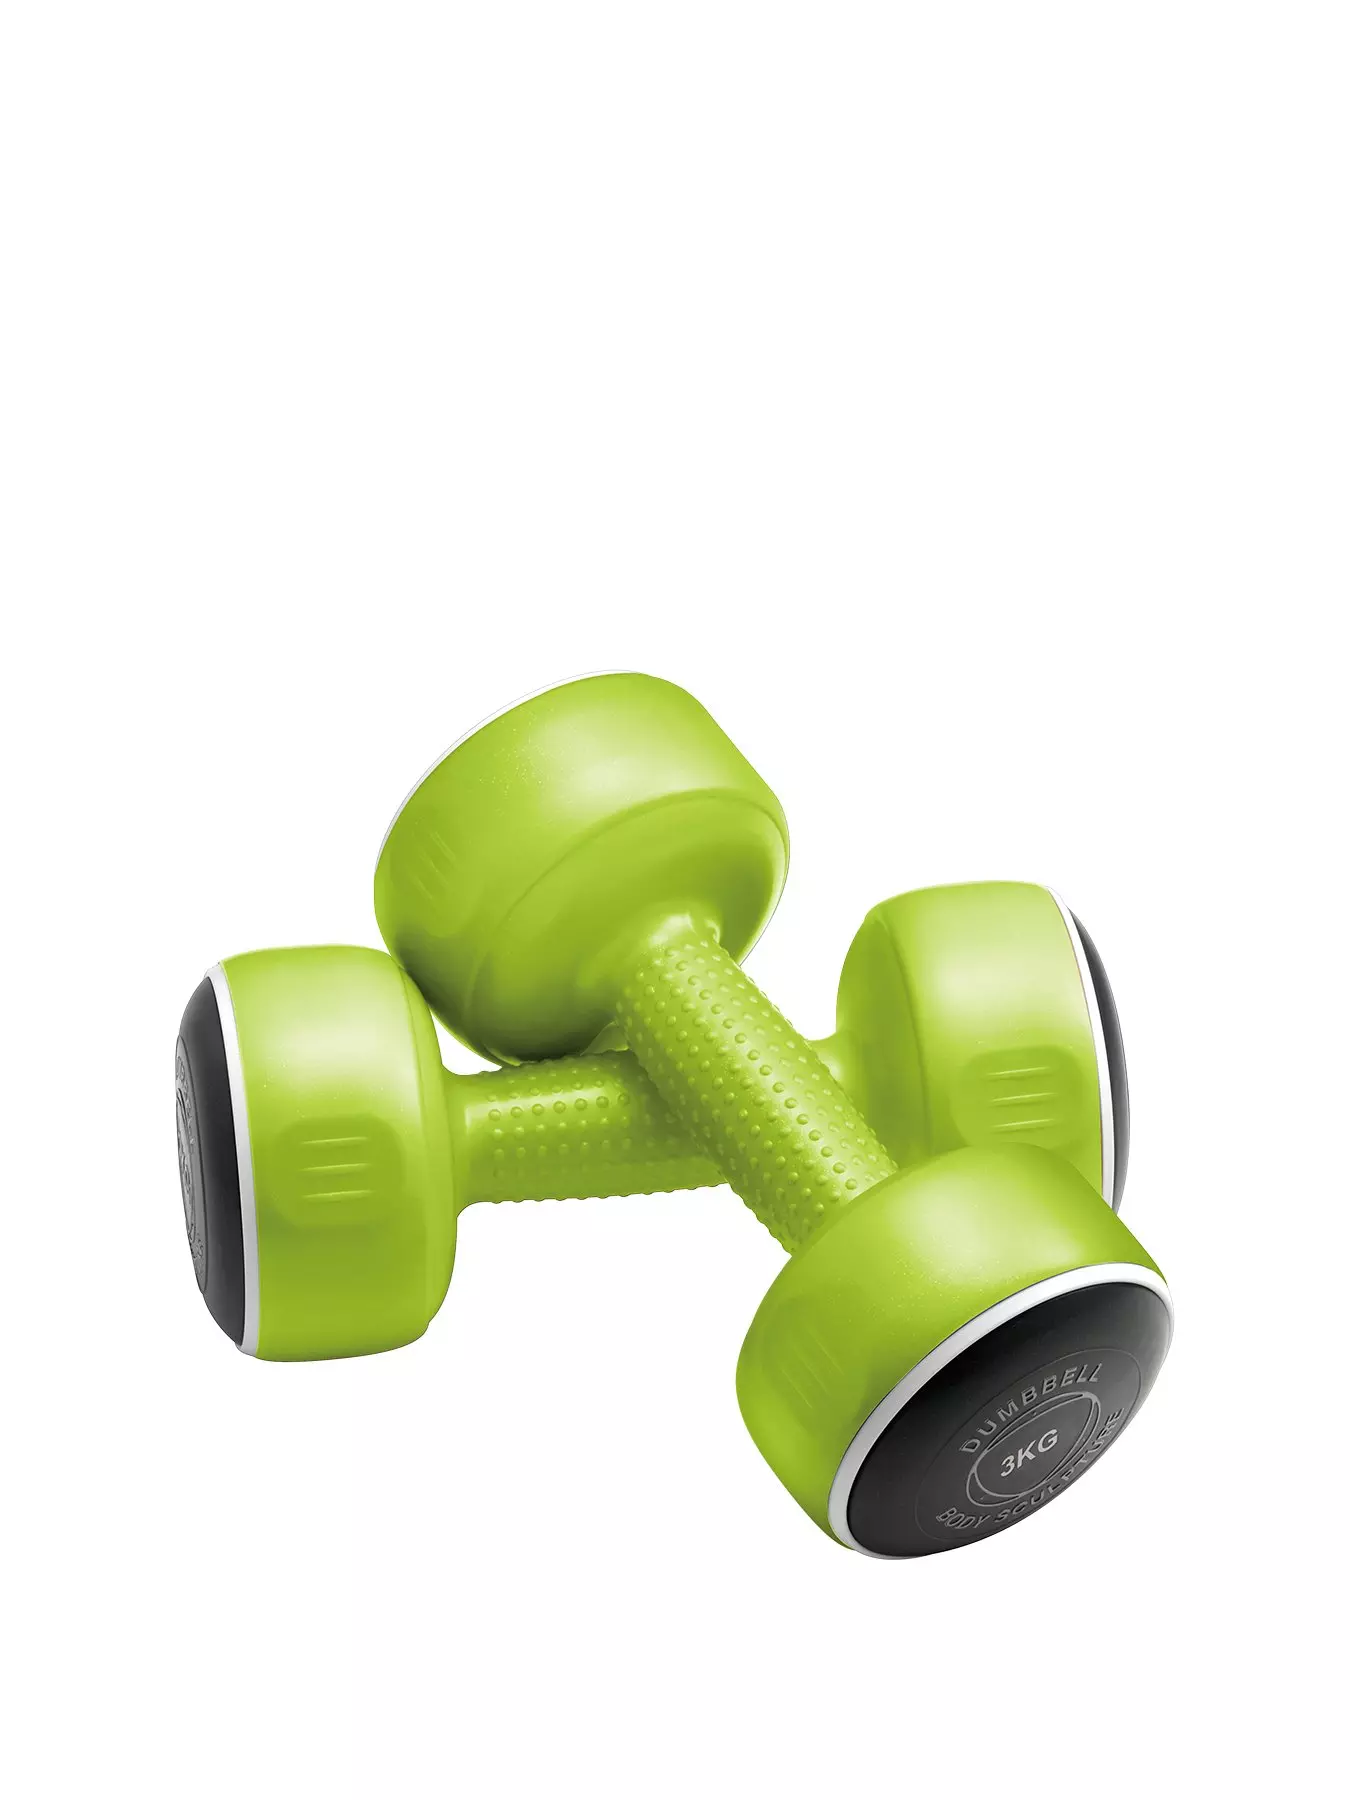 Body Sculpture Smart Dumbbells Pair Home Exercise Fitness Workout Hand  Weights